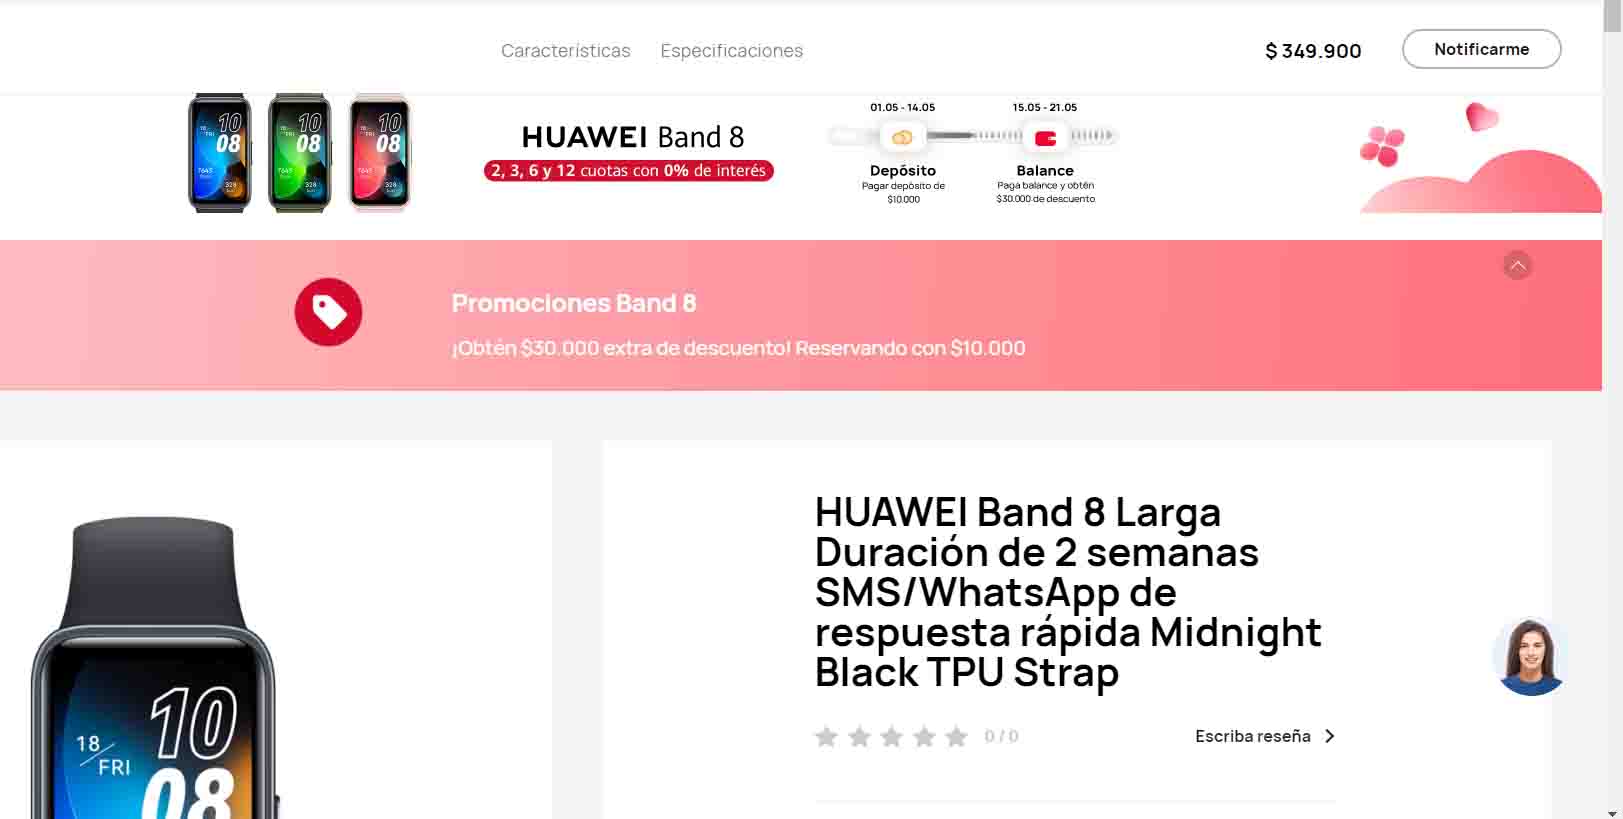 Huawei Band 8 Latin America Colombia sale page